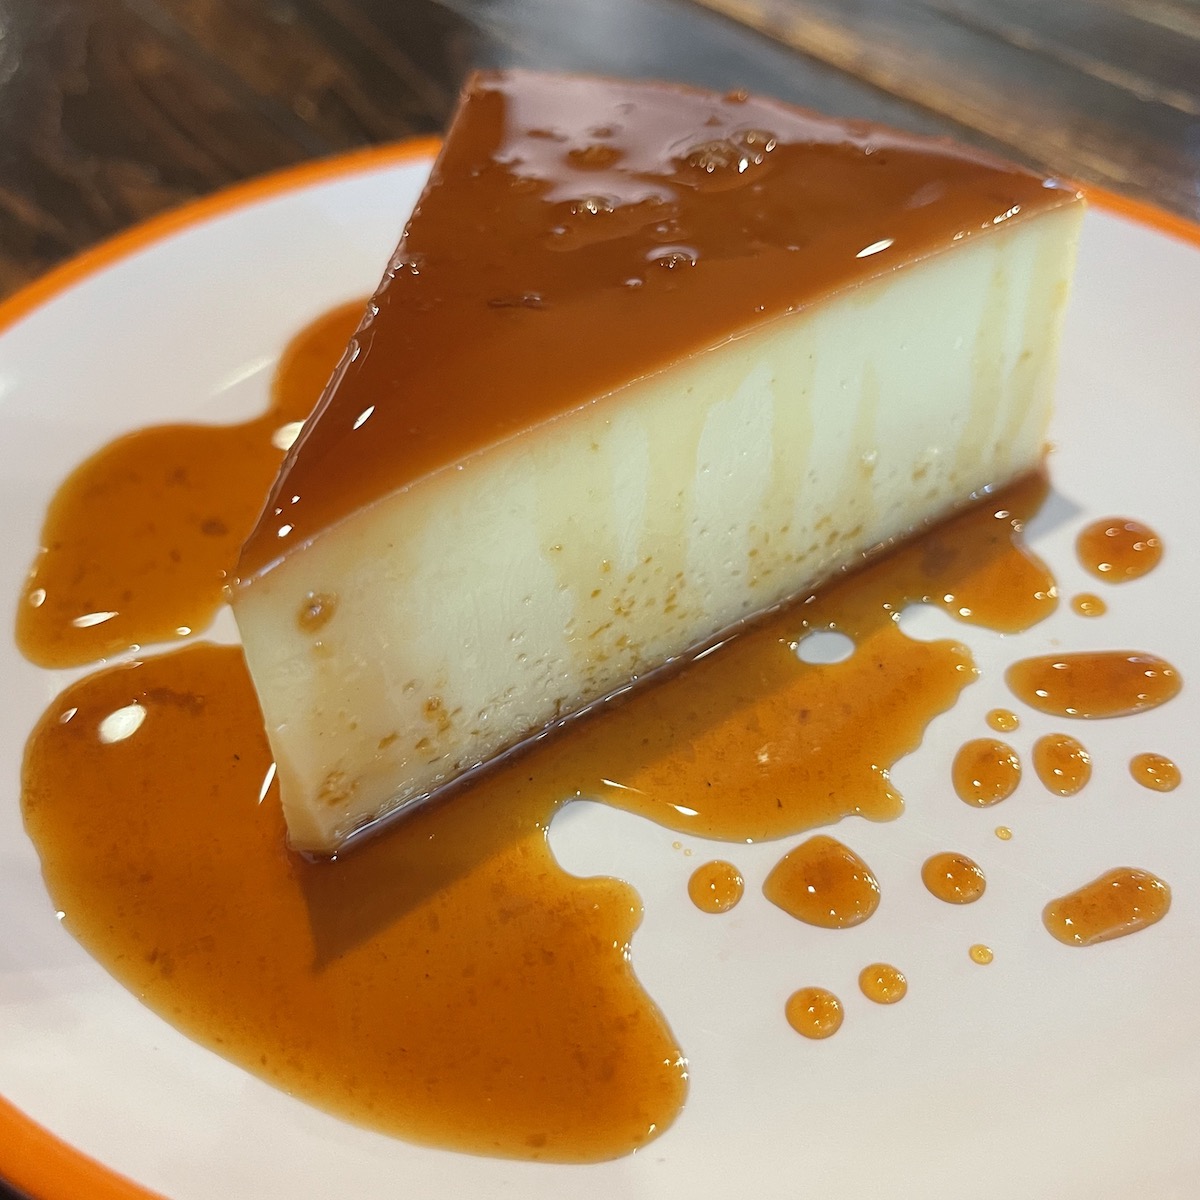 Smoked Flan from Smoke and Dough in West Kendall, Florida